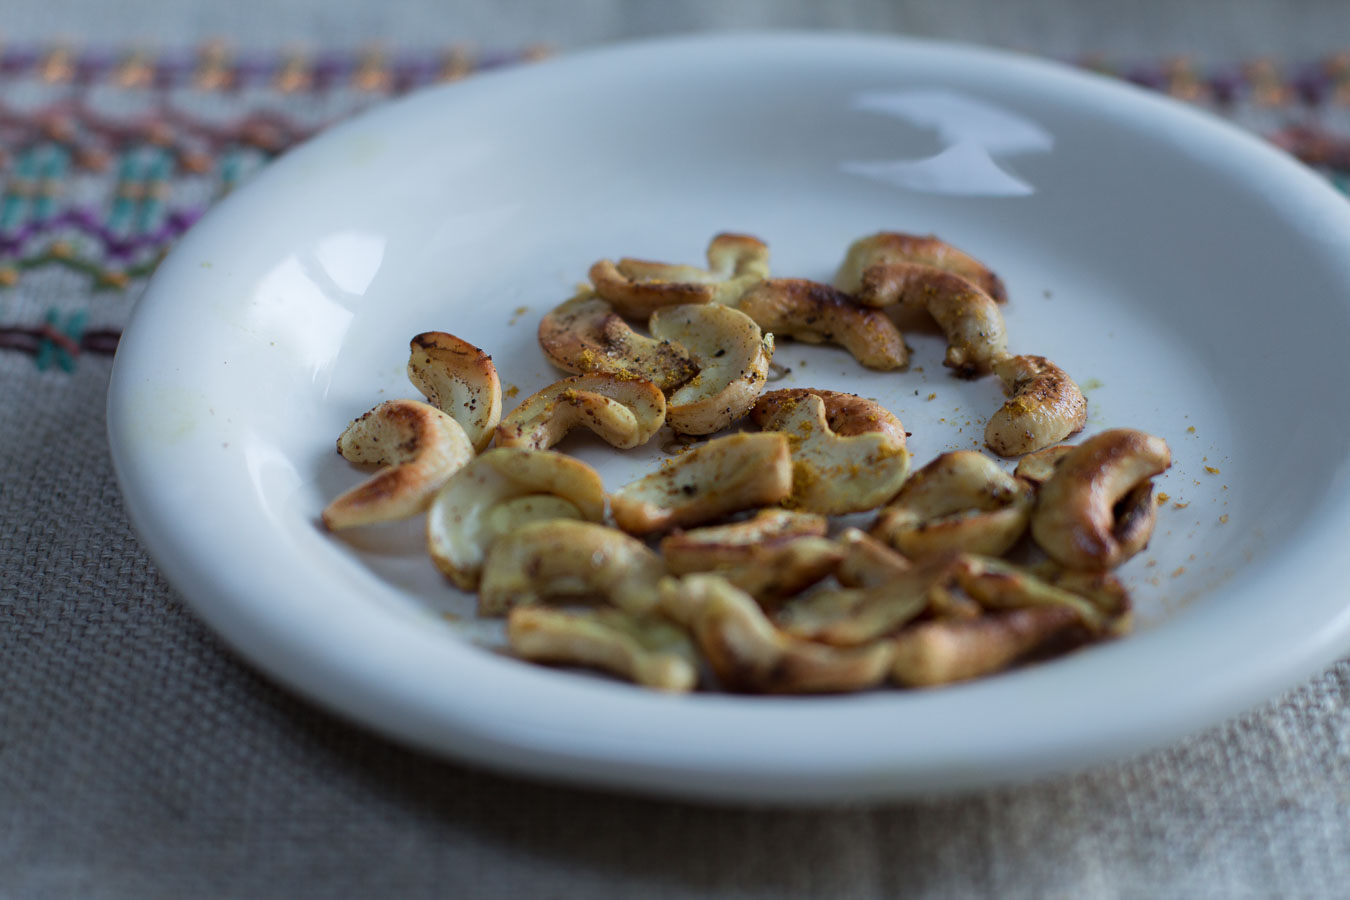 Spiced Cashew Garnish is easy to prepare in a small skillet… adds a nice crunch!